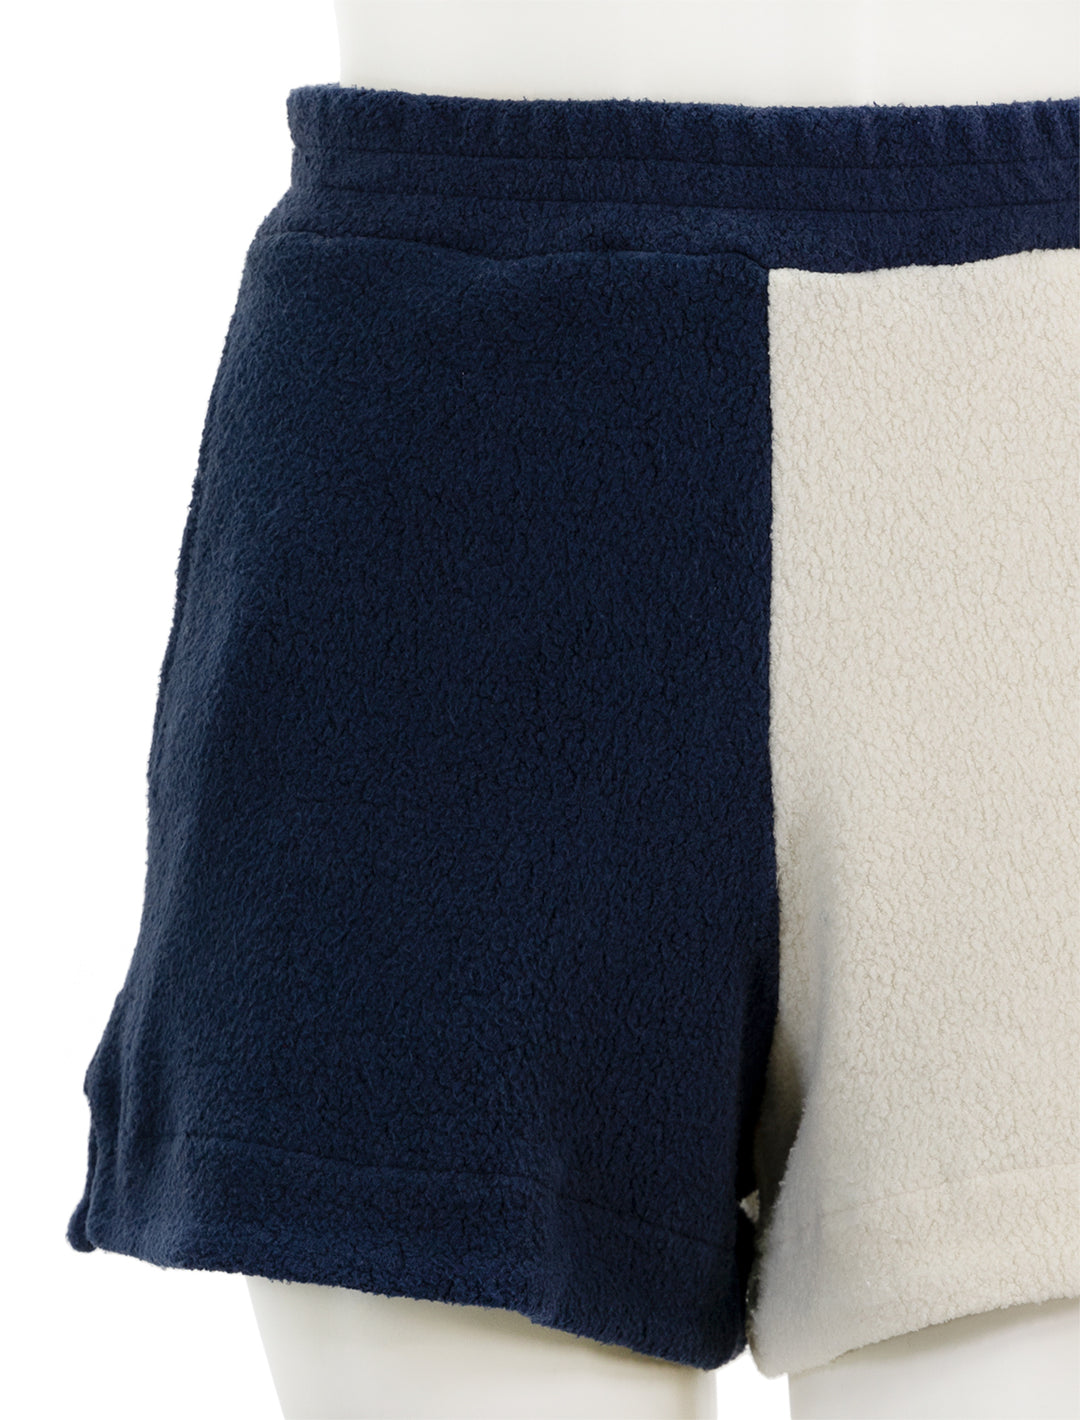 Close-up view of Sundry's sherpa pull-on shorts in cream and navy.